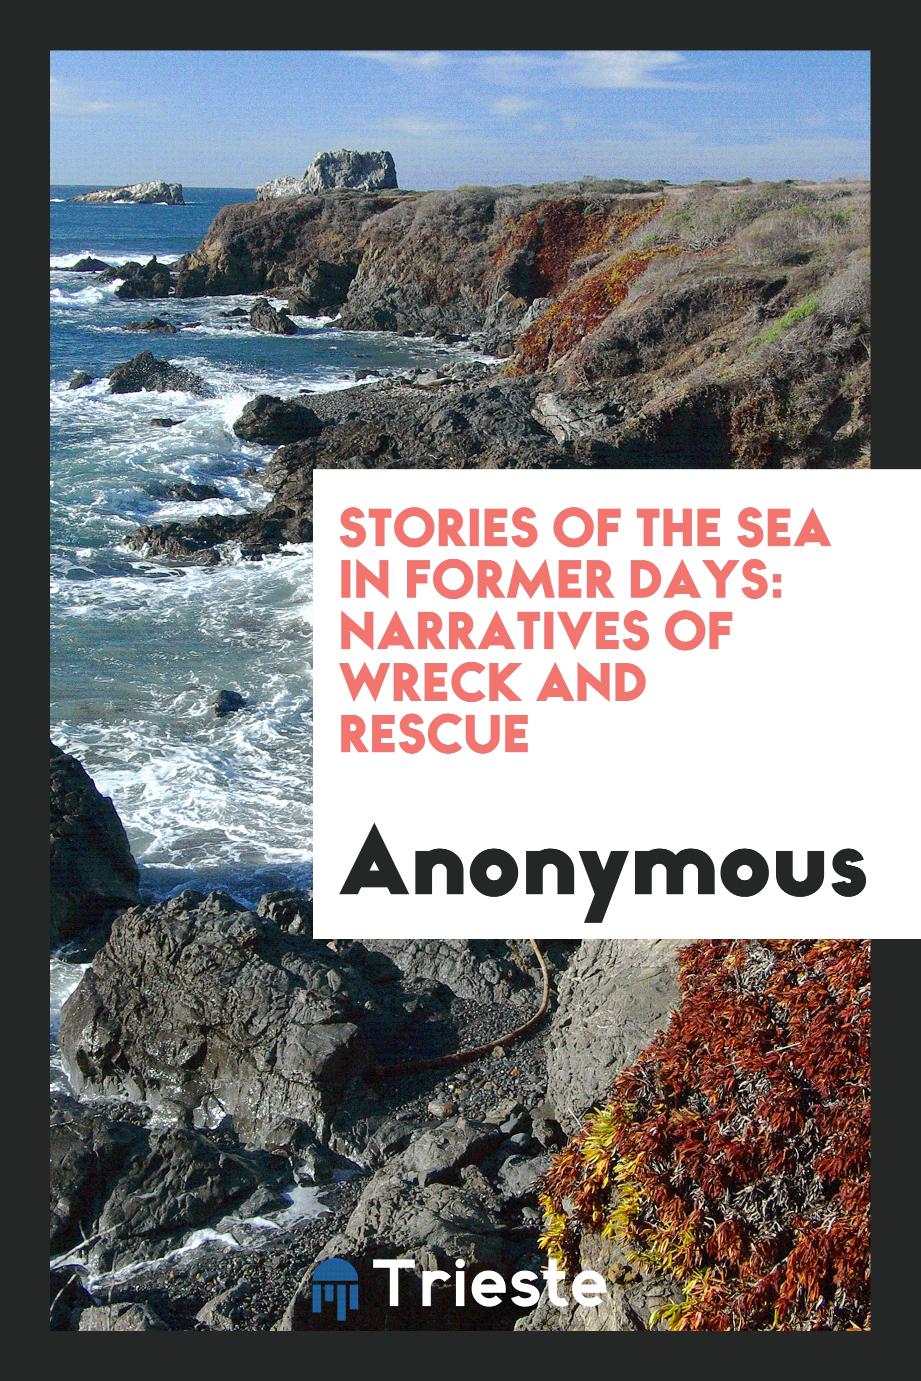 Stories of the sea in former days: narratives of wreck and rescue